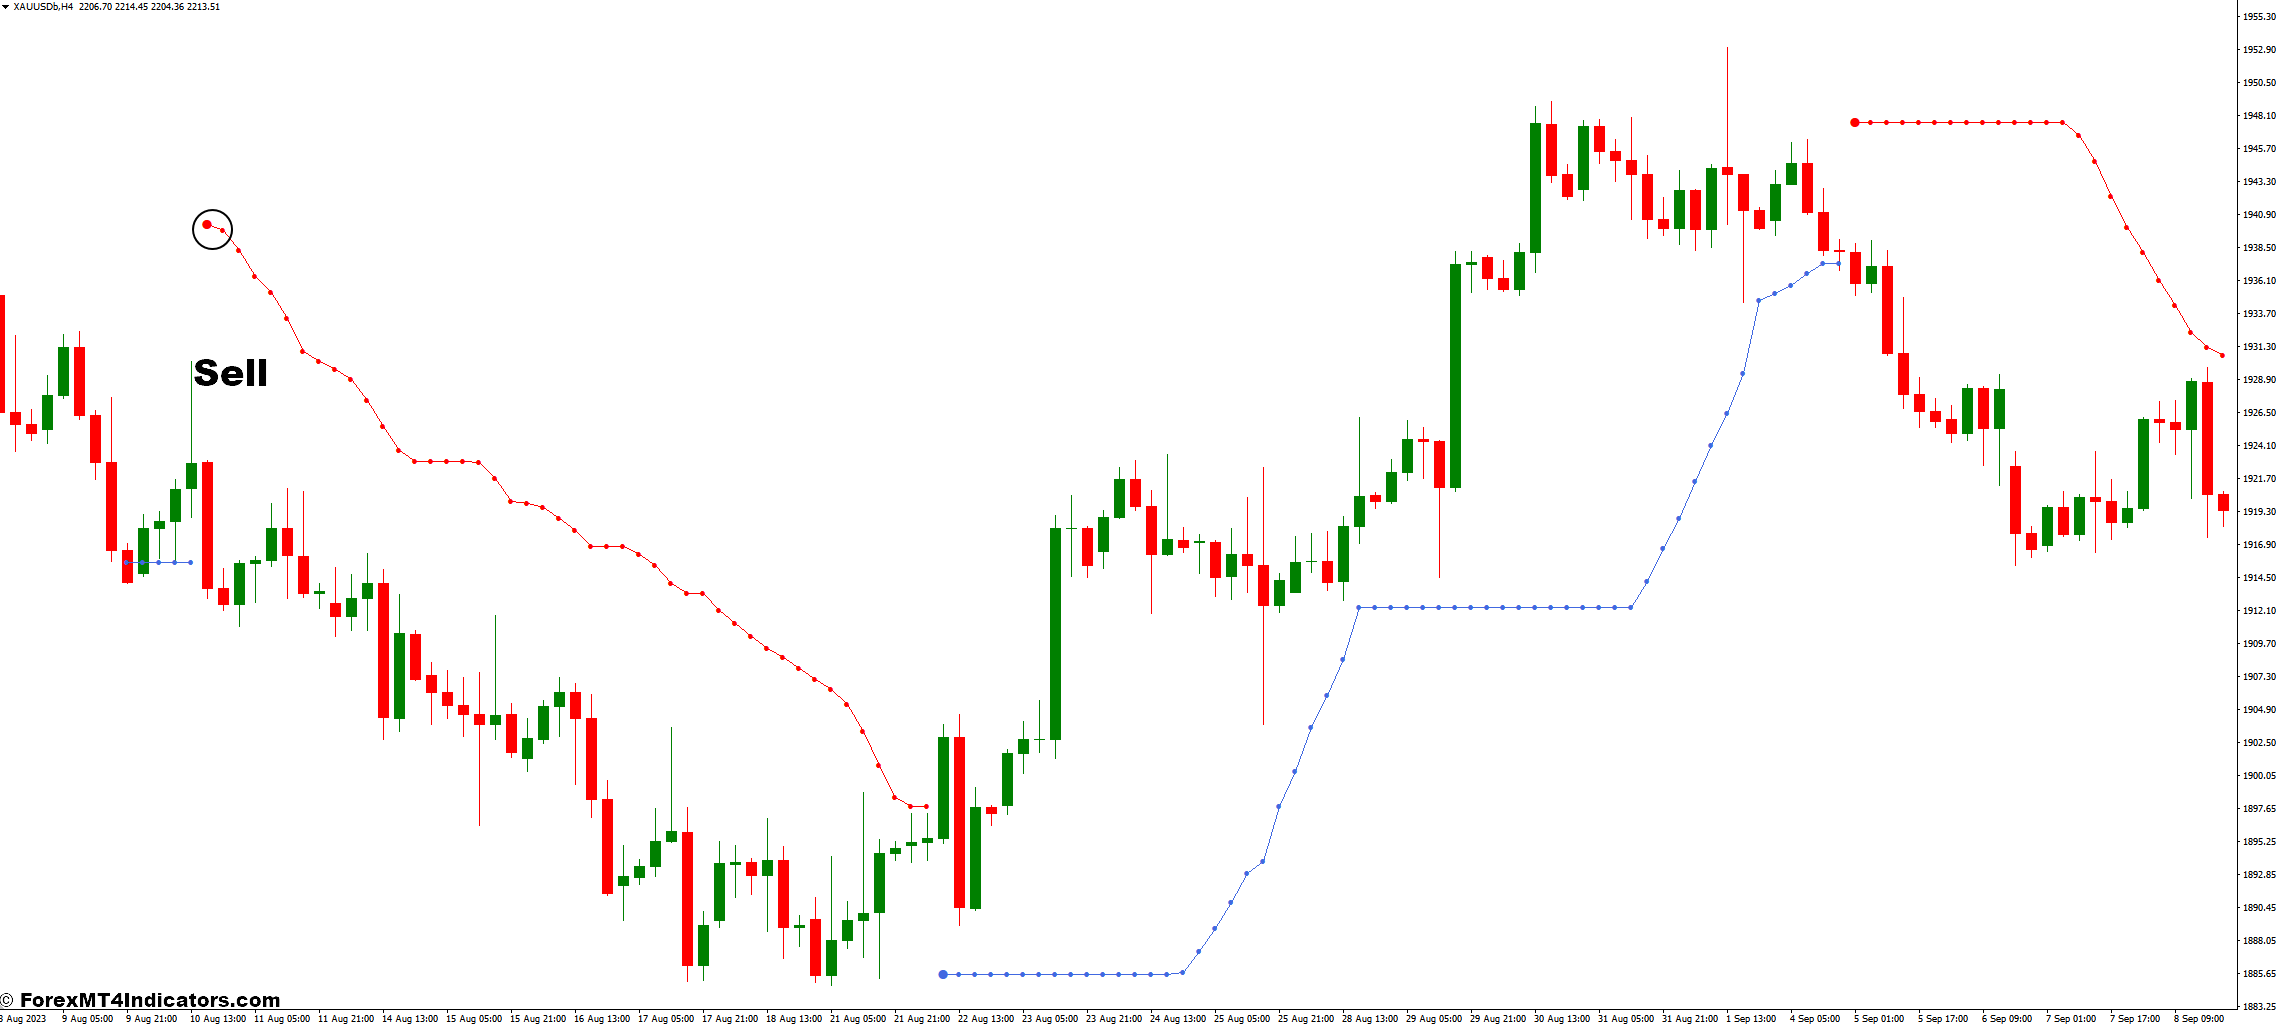 How to Trade with the TopTrend Indicator - Sell Entry